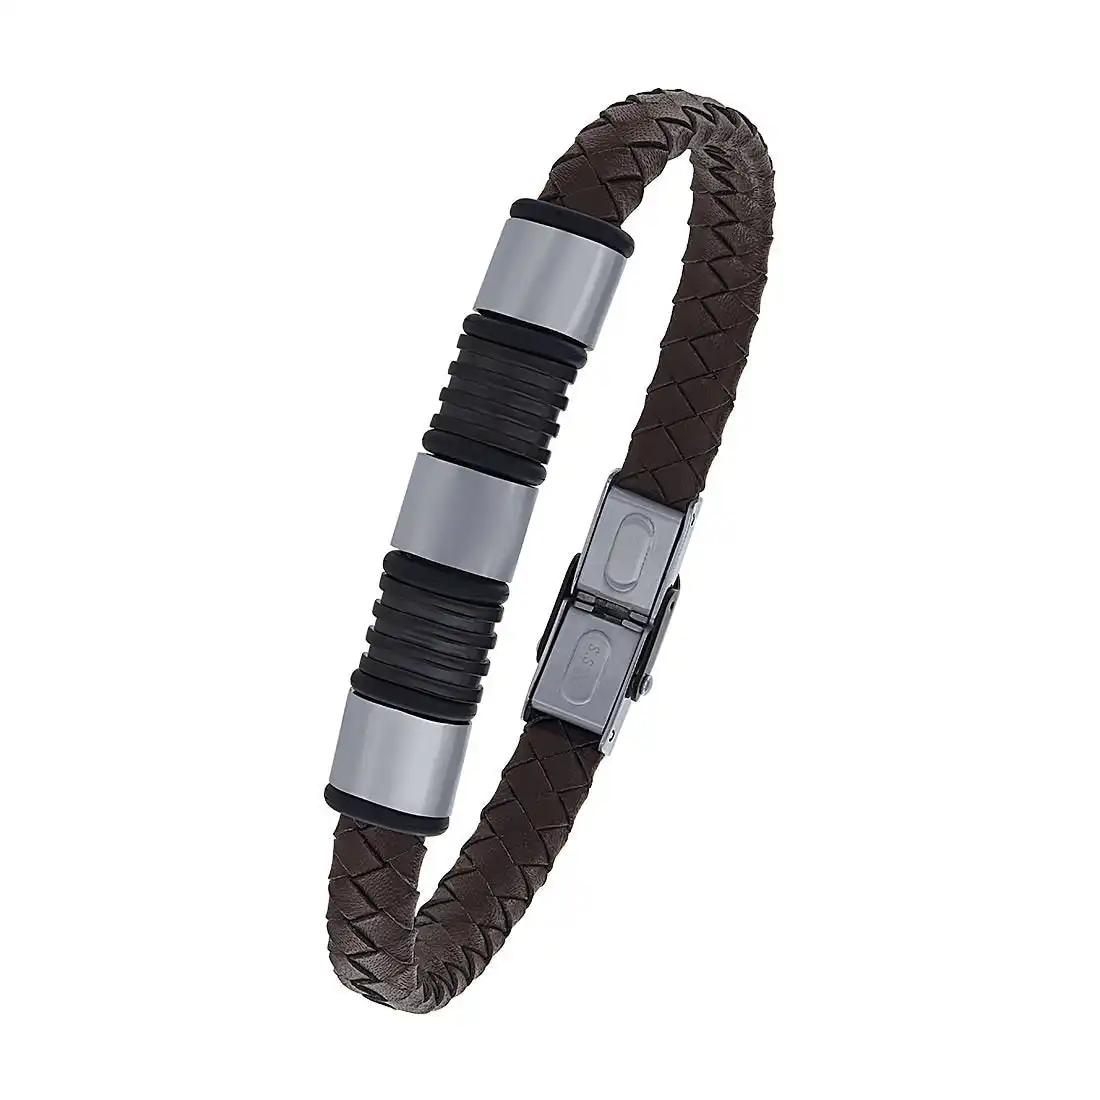 21cm Men's Brown Leather Bracelet with Stainless Steel